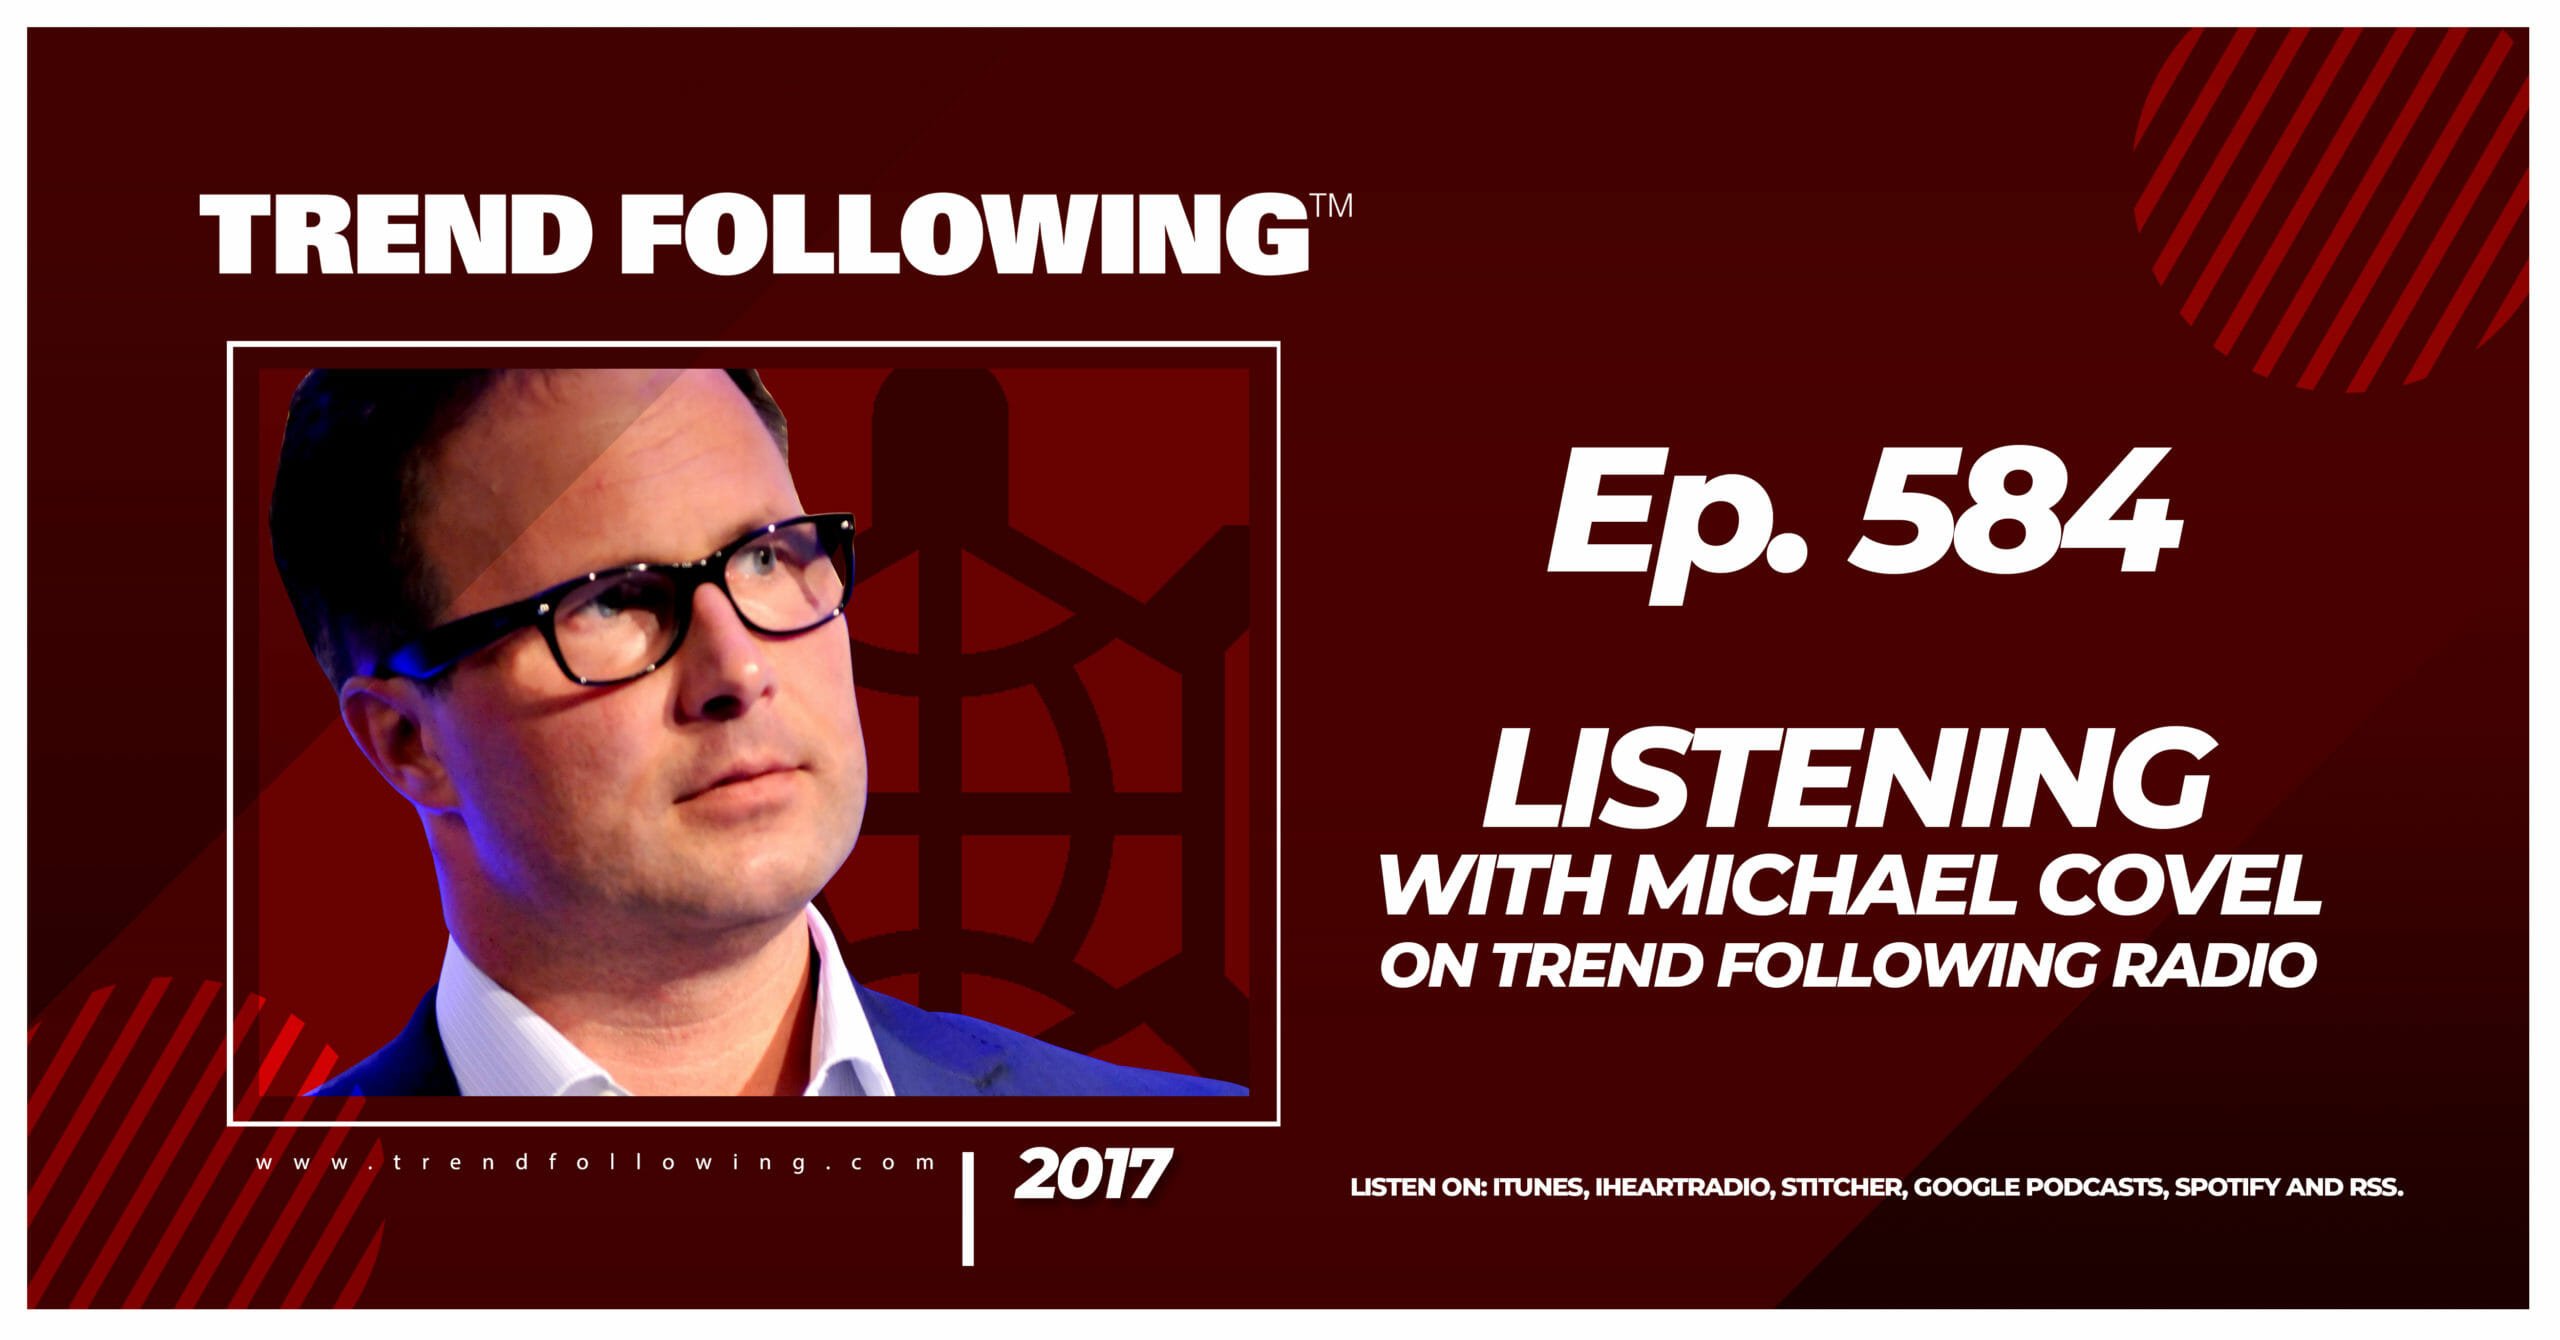 Listening with Michael Covel on Trend Following Radio